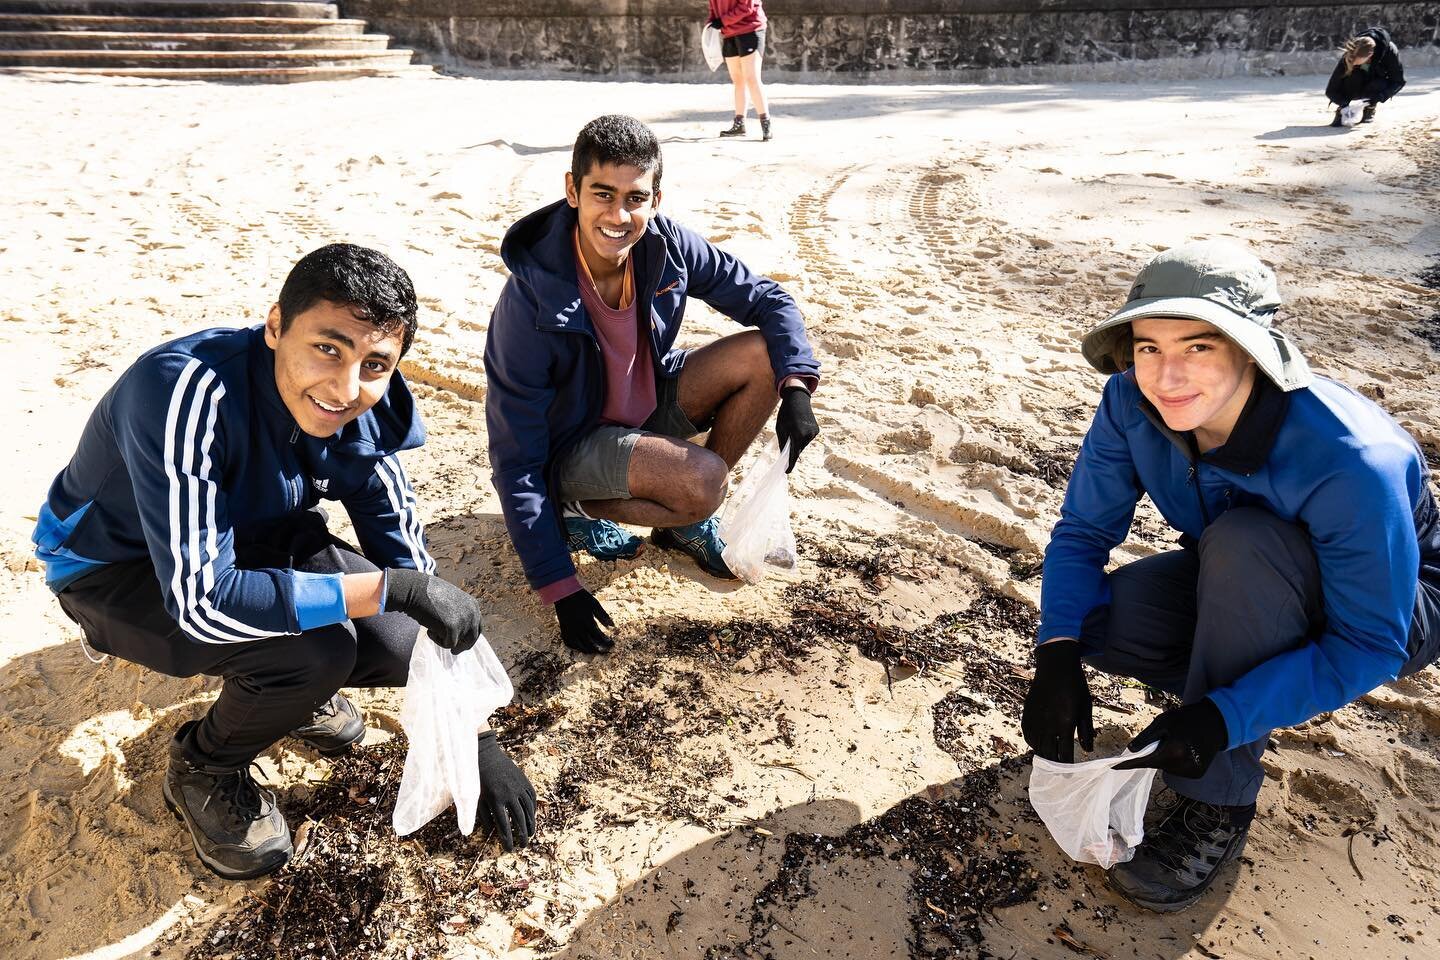 Our Duke of Ed Program was off to a great start this morning with a Beach Cleanup and Reshaping Waste Workshop at Manly Cove! 🧤🪣♻️🌏🤩

Our biggest categories of litter found today were :
🚧⚙️ Construction items and 
🔎🔵 Microplastic fragments 

D